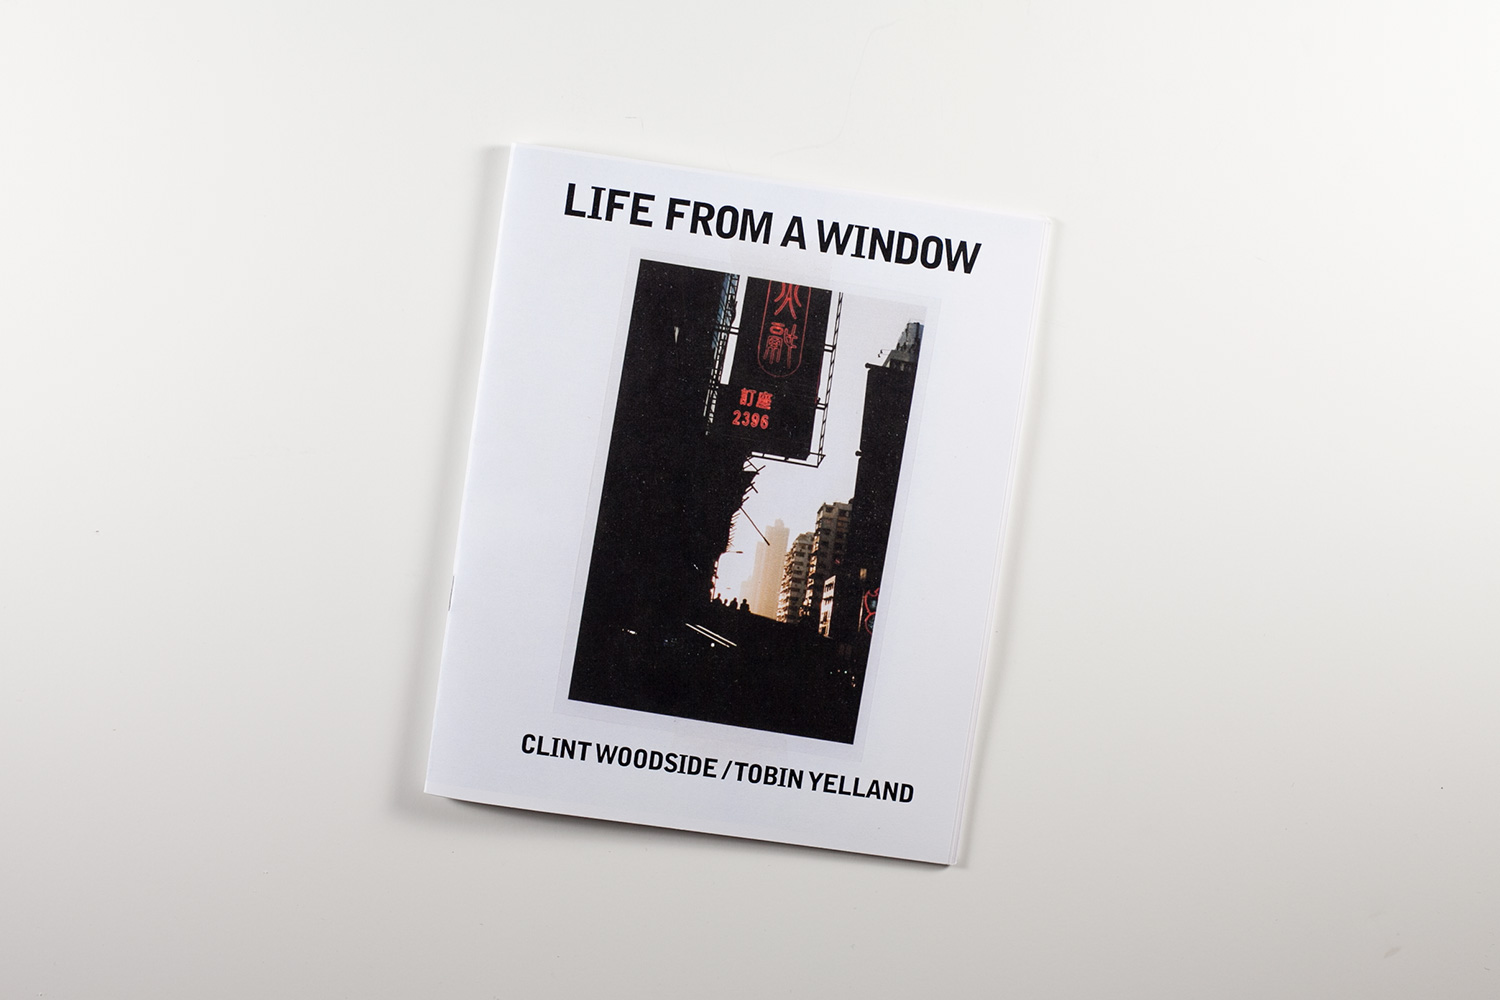   Clint Woodside / Tobin Yelland - &nbsp;Life From A Window  &nbsp; 40 pg. full color photo zine.  Color Laser Print 2 4" x 6" Prints included 8.5” x 7”&nbsp;  Edition of 100 Out of print   Clint Woodside &amp; Tobin Yelland's travel log in Asia.  